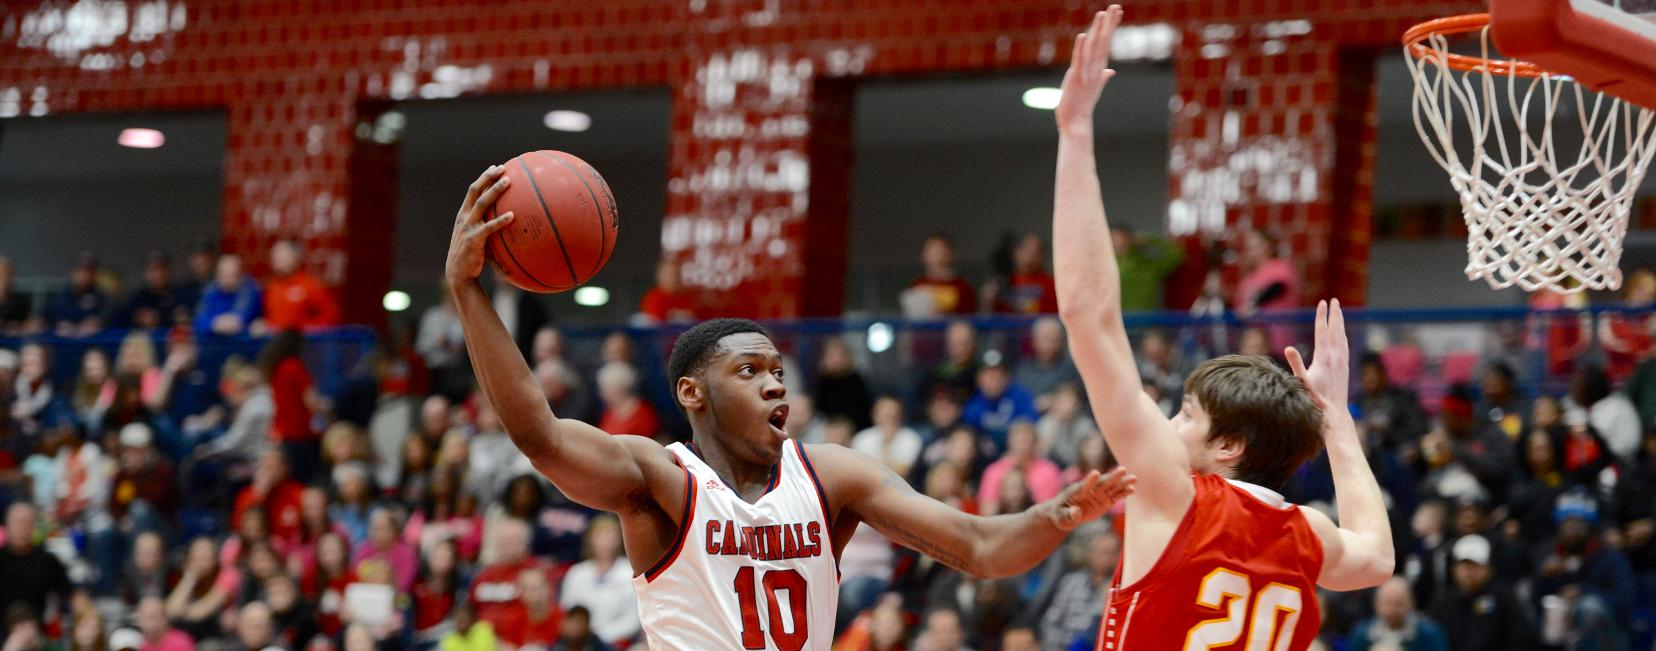 Cardinals Fall Late to #22 Ferris State in First-Place Matchup, 62-57